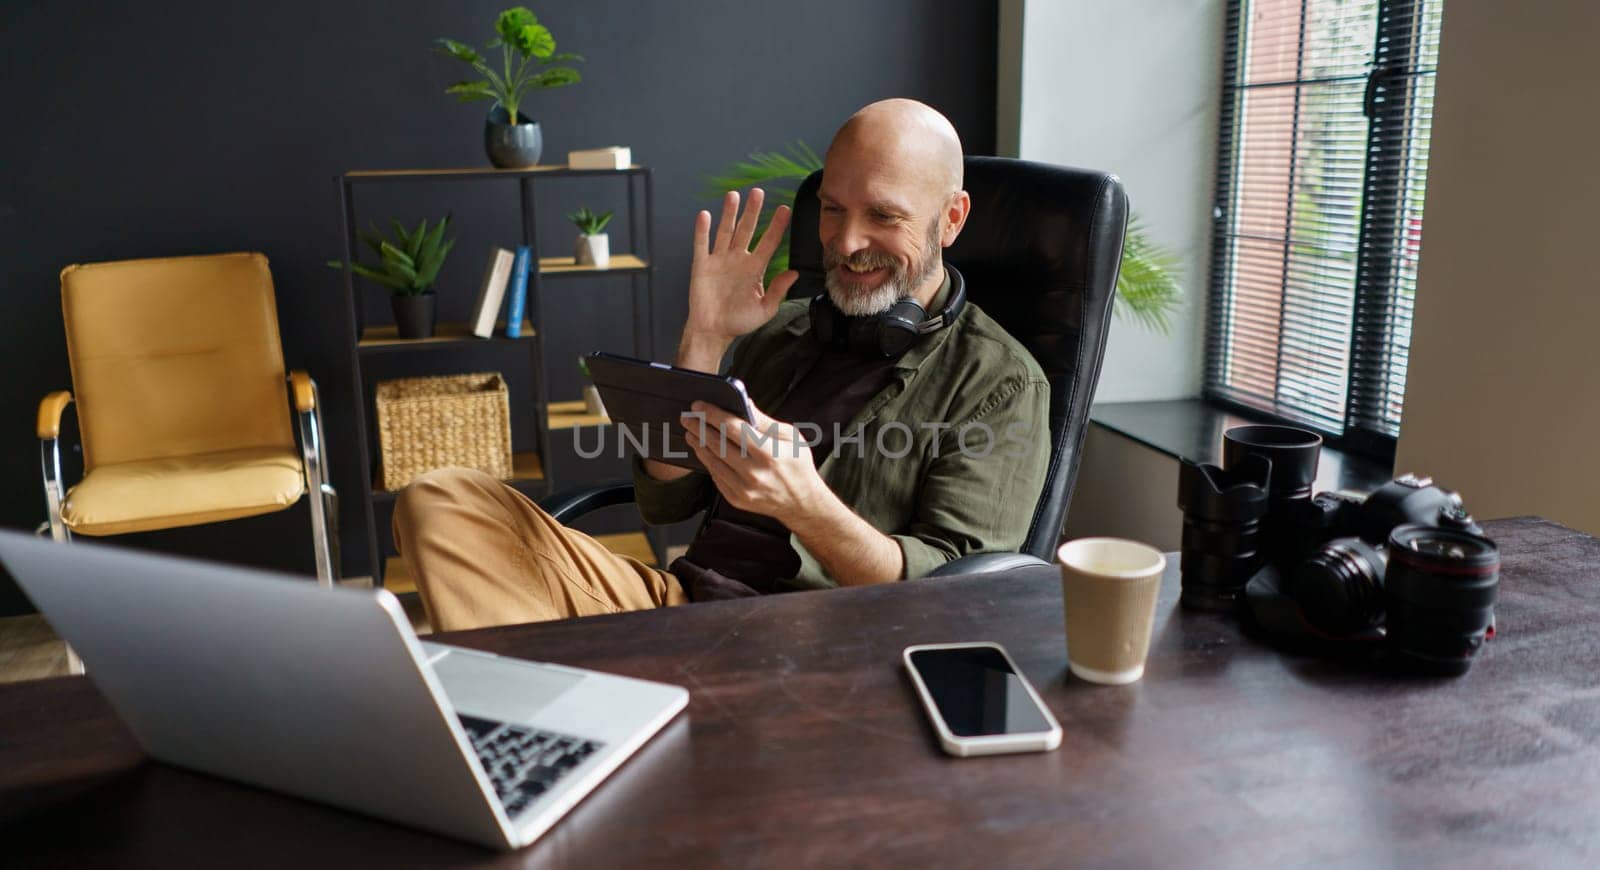 Photographer has online call with client. He holds Tablet PC and welcoming interlocutor. Desk in front equipped with laptop, mobile phone, and photo camera with lenses, indicating tools of business. by LipikStockMedia